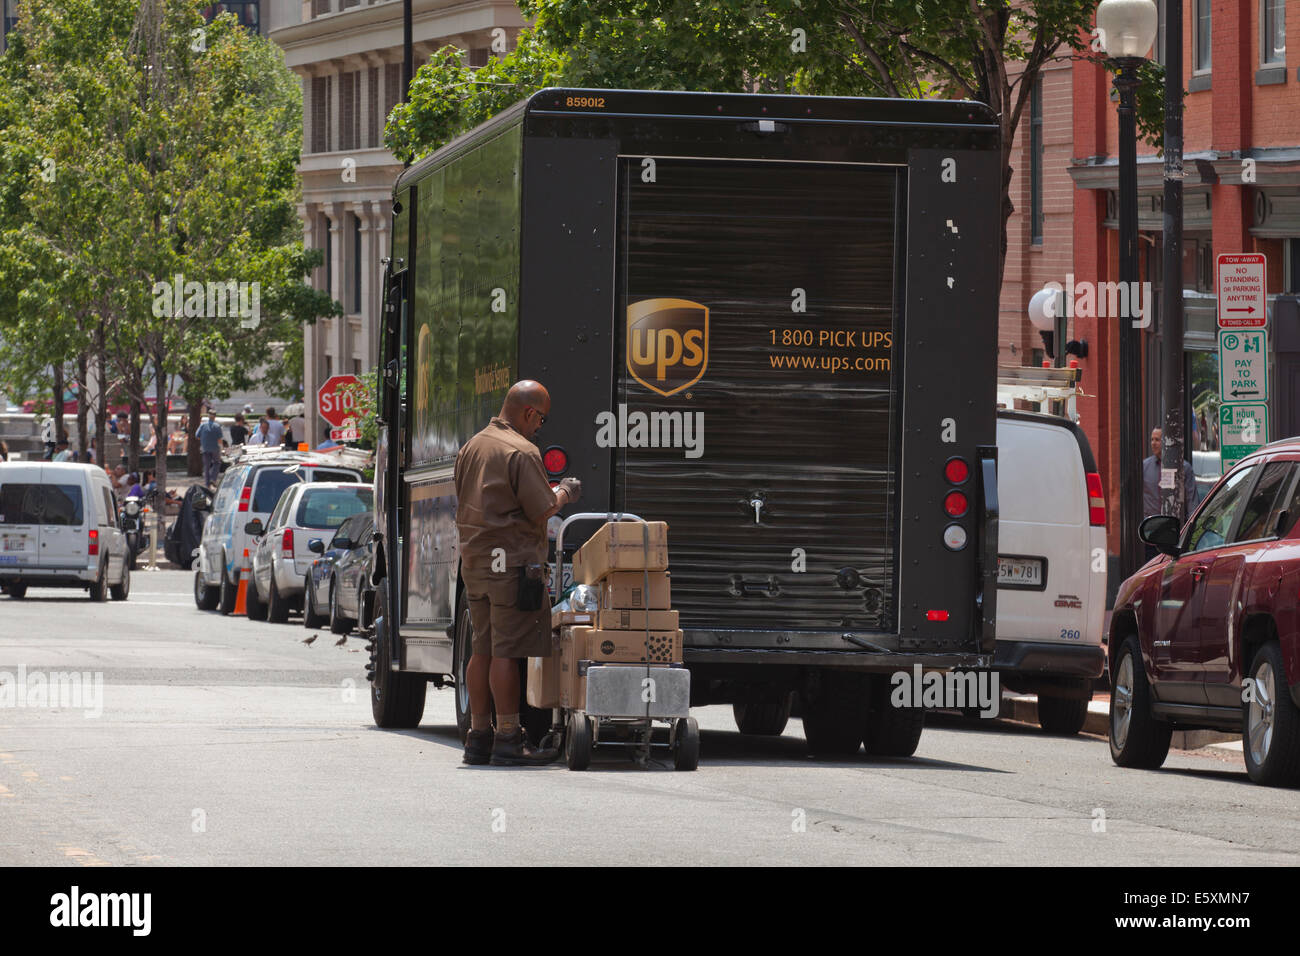 UPS delivery man preparing to deliver packages - Washington, DC USA Stock Photo